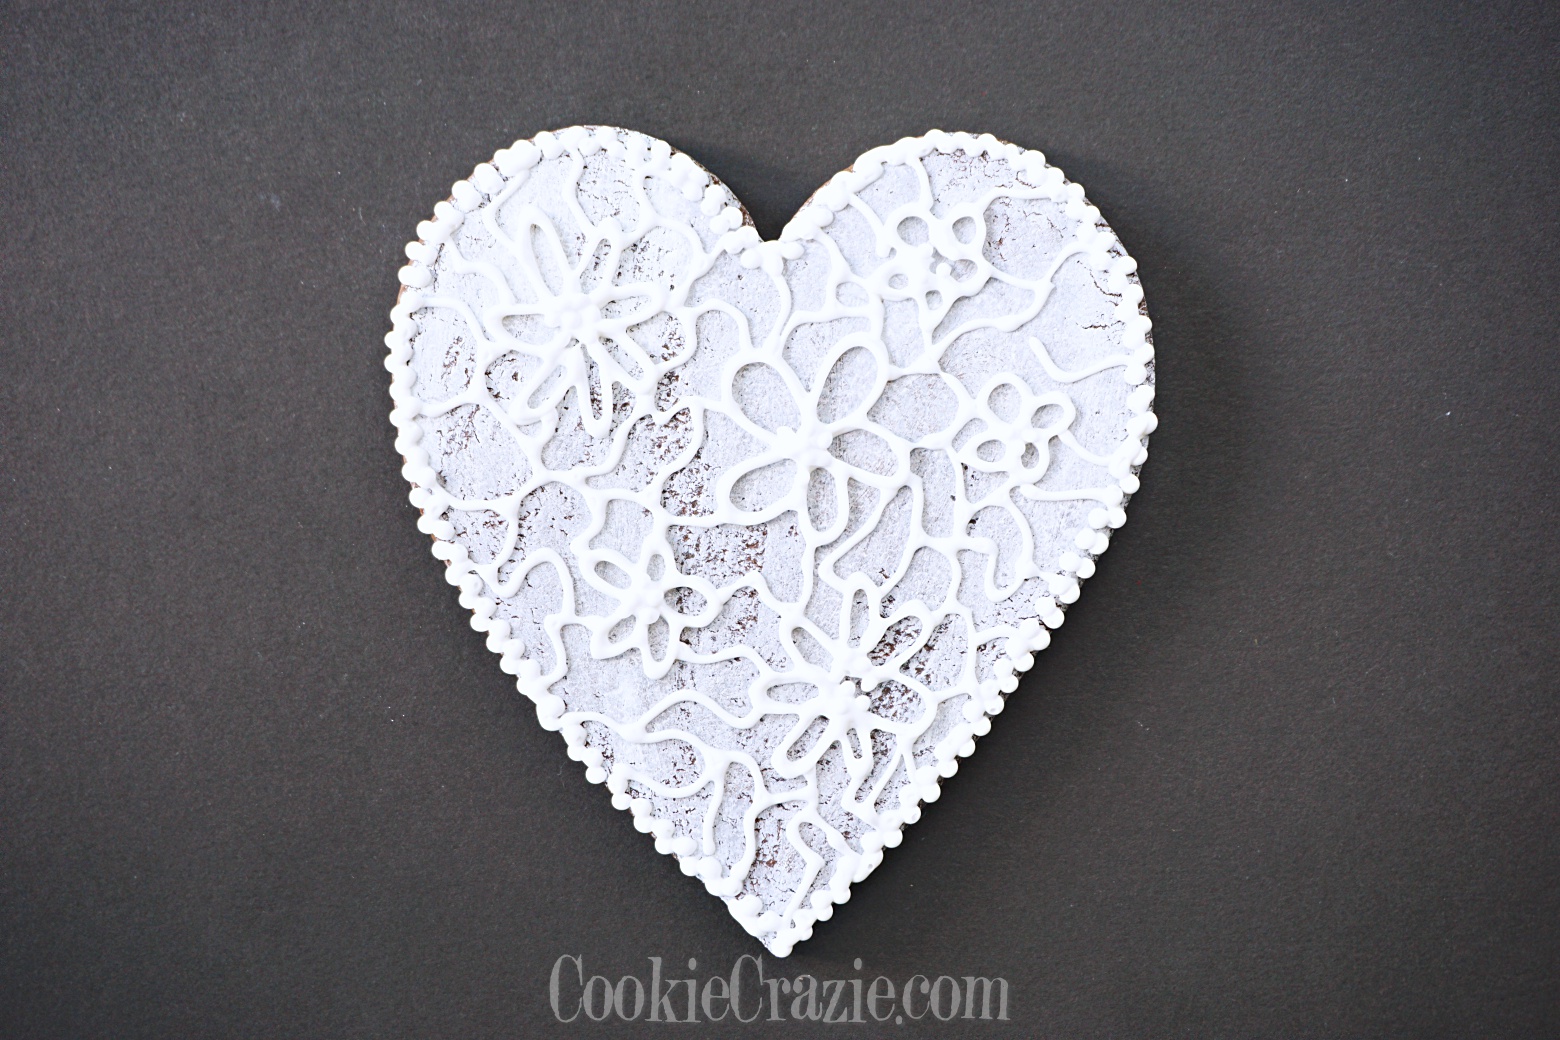  Lacy Valentine Heart Decorated Sugar Cookie YouTube video  HERE  